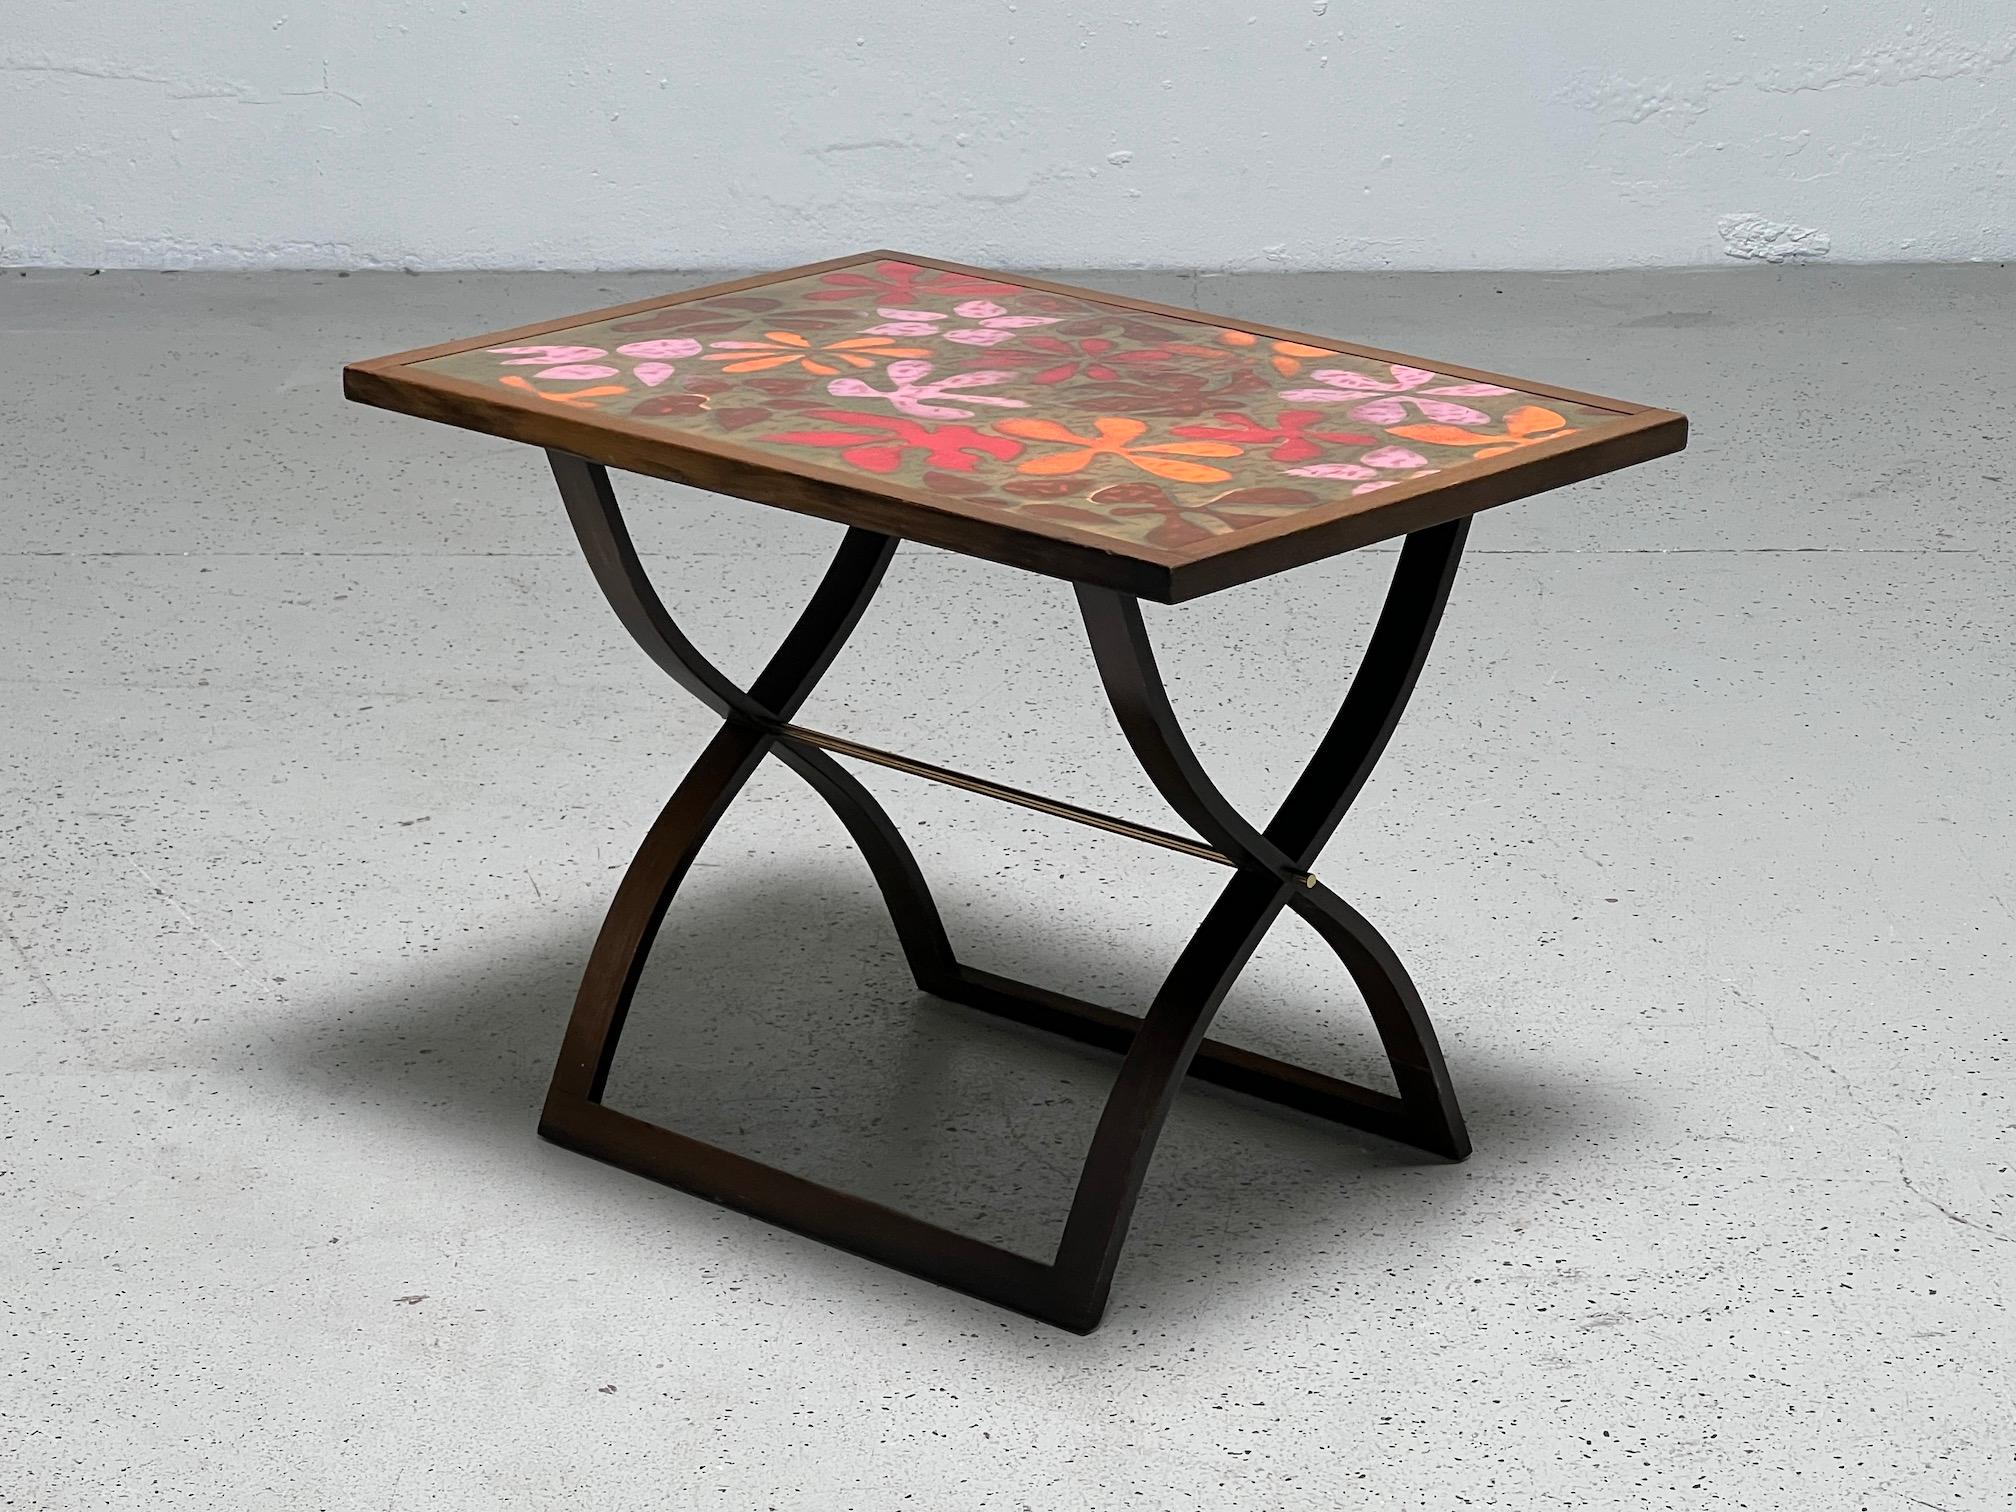 A rare enameled copper top table designed by Harvey Probber.